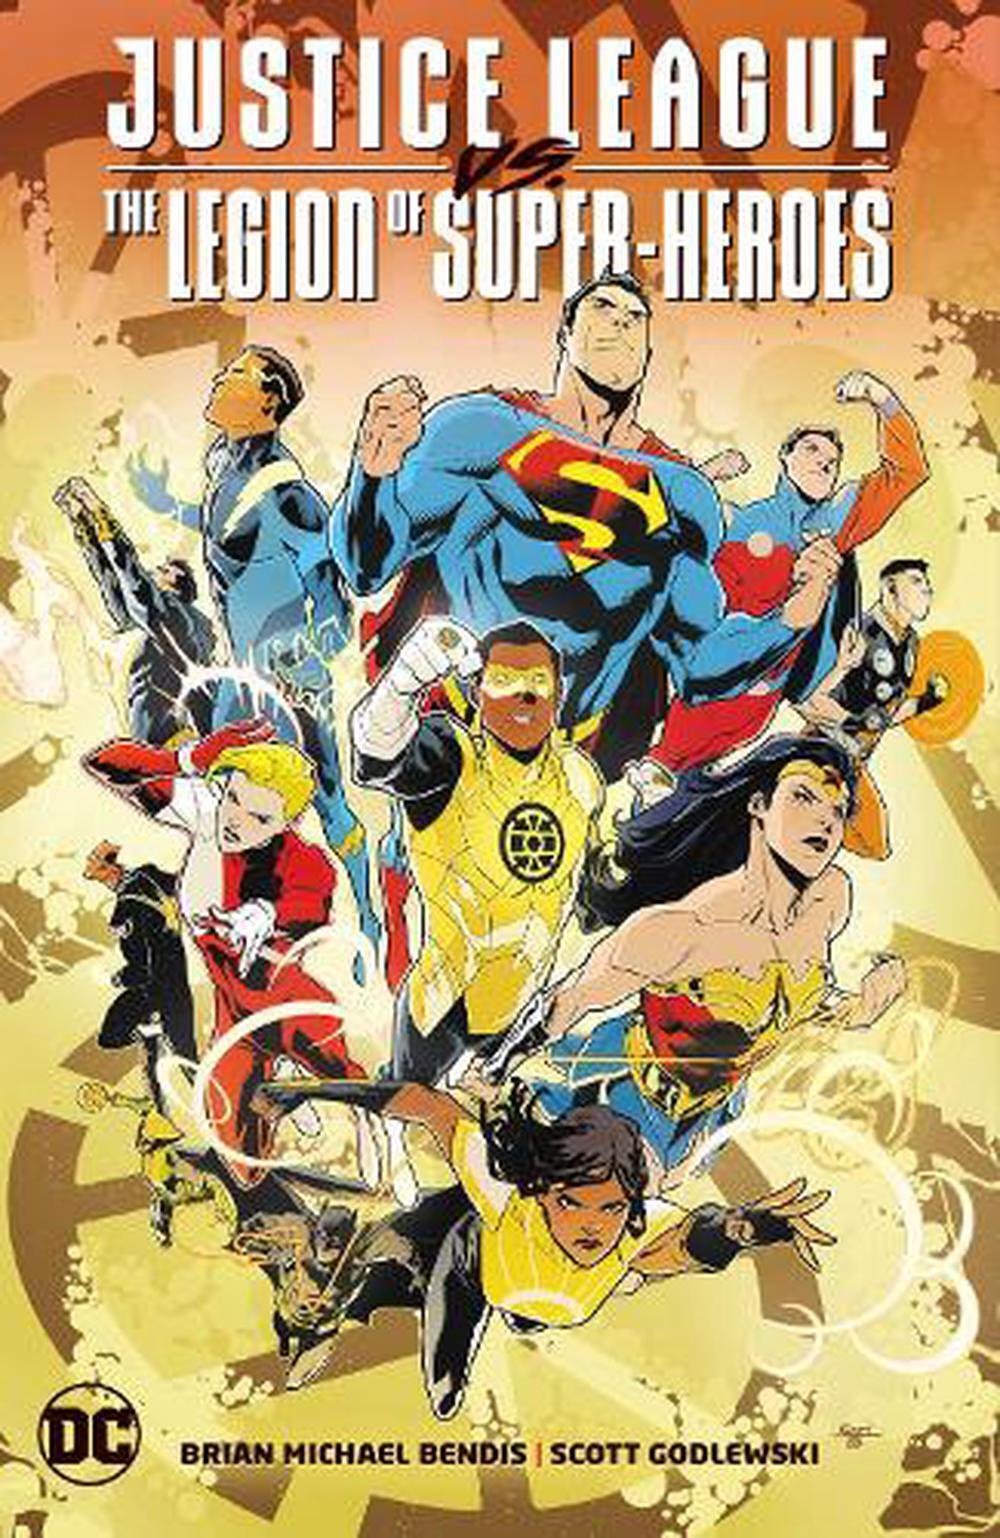 Justice League Vs. The Legion of Super-Heroes by Brian Michael Bendis (English) 